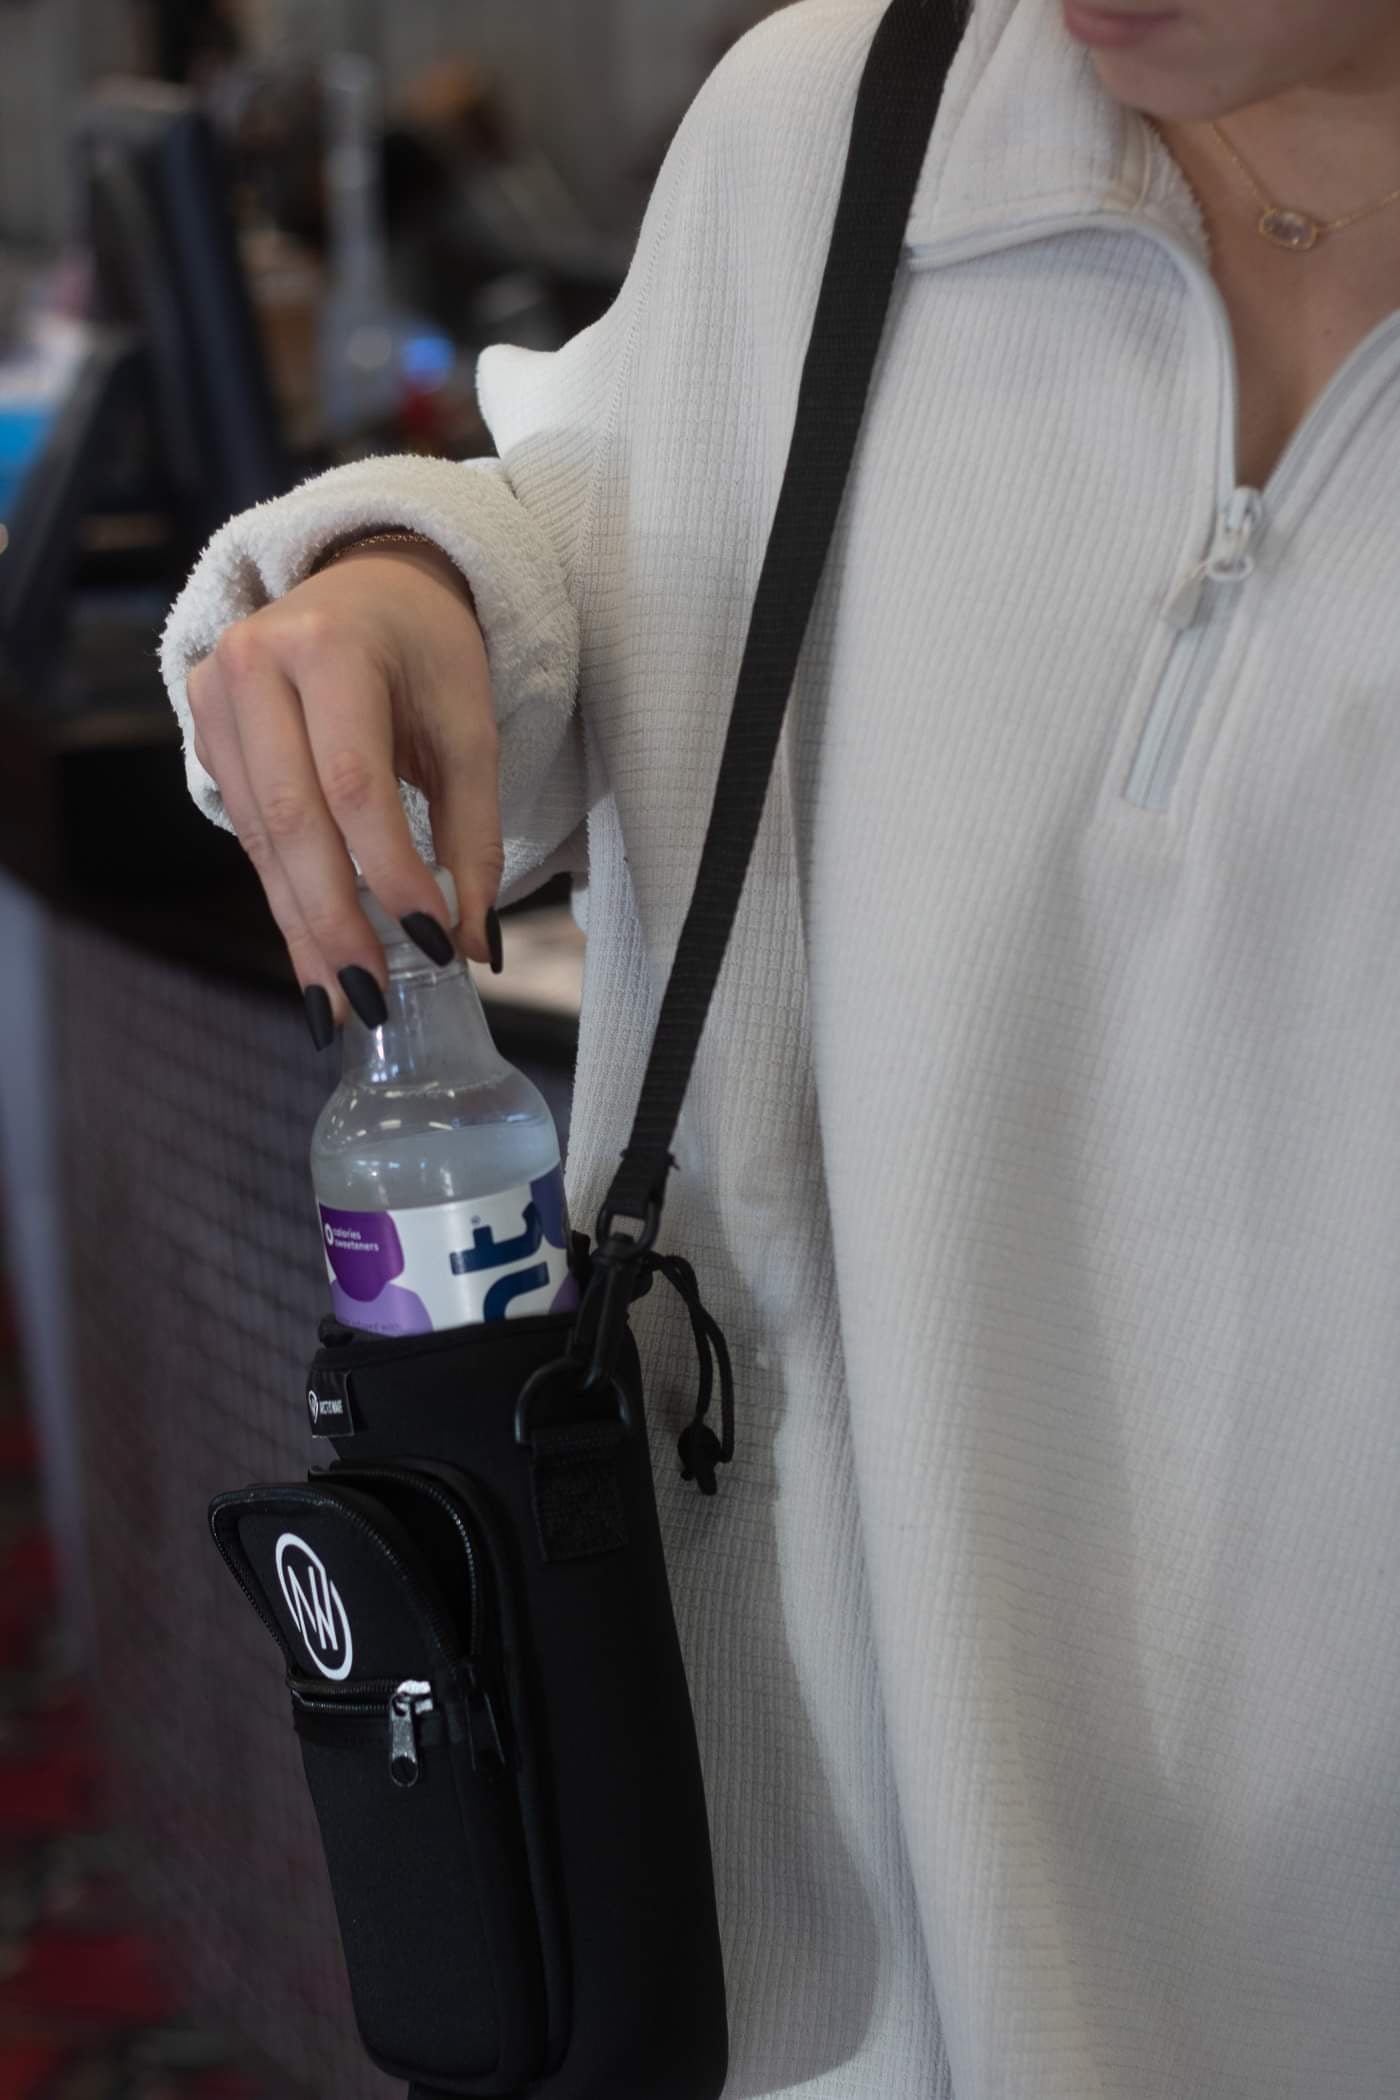 Water Bottle / Cell Phone Carrier Bag with a Shoulder Strap